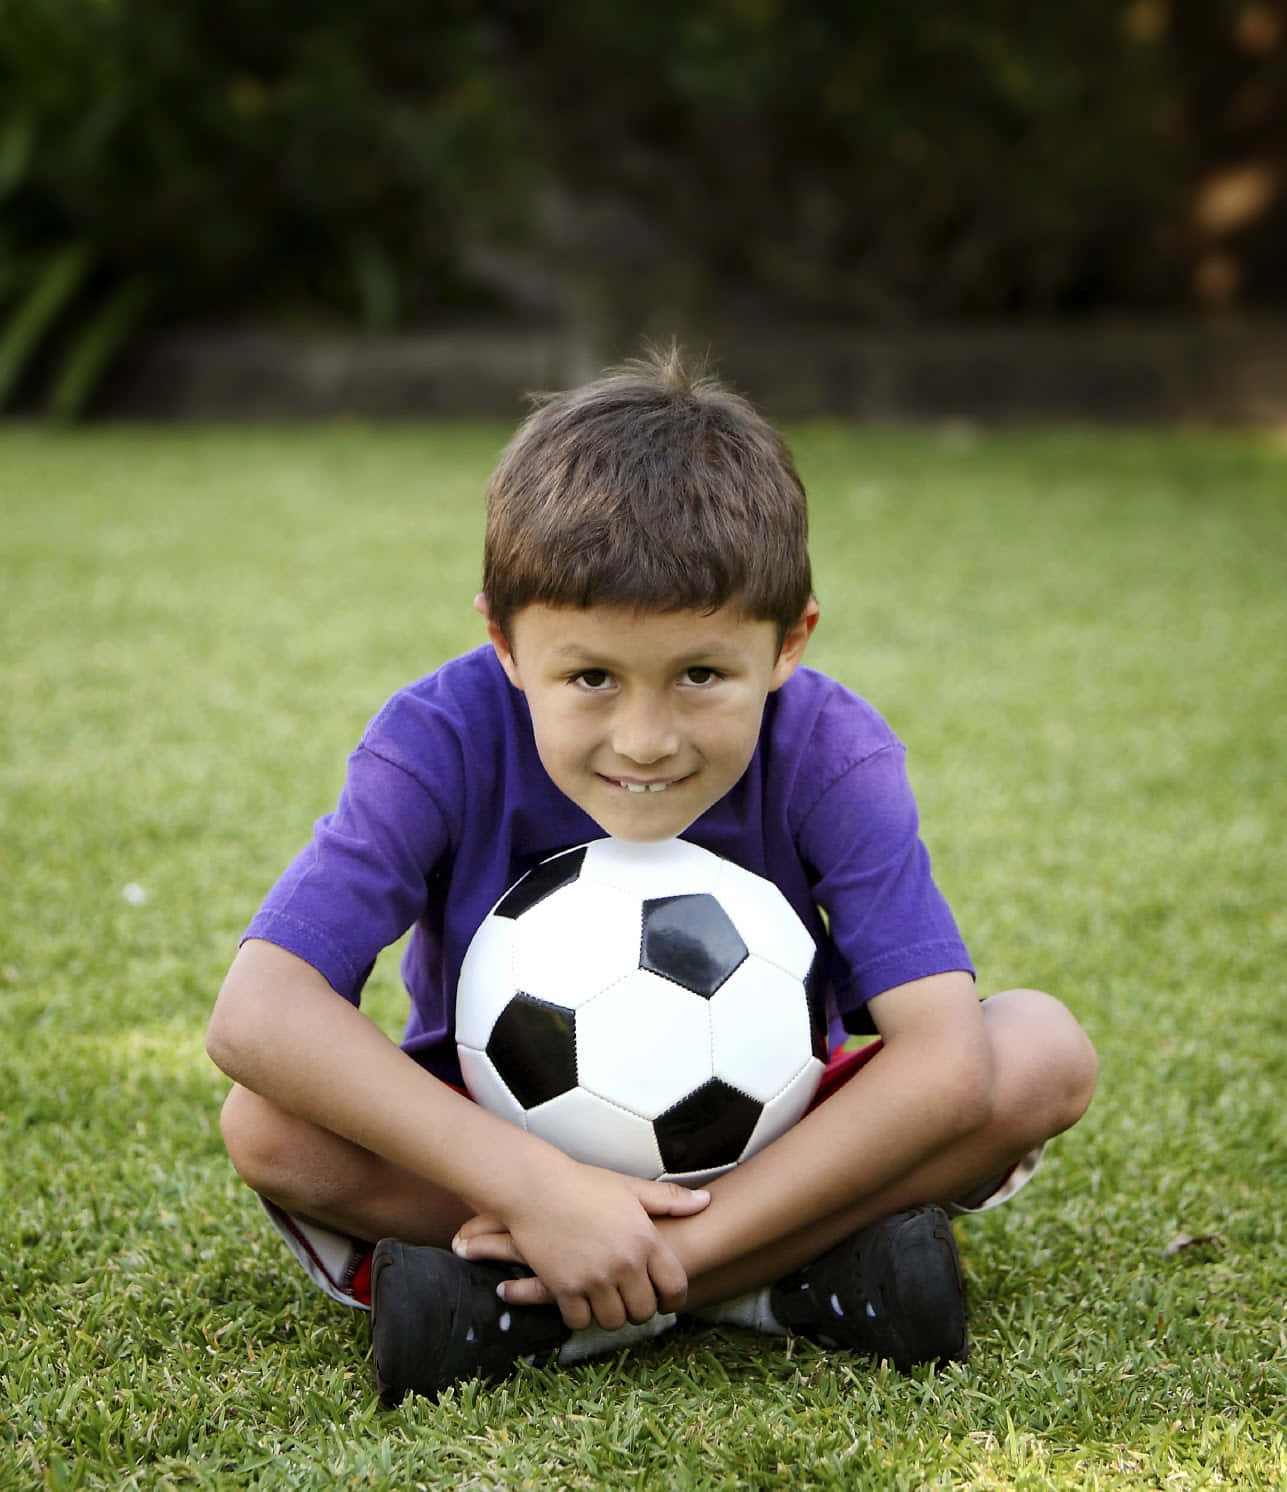 Exciting Kids Soccer Game Wallpaper